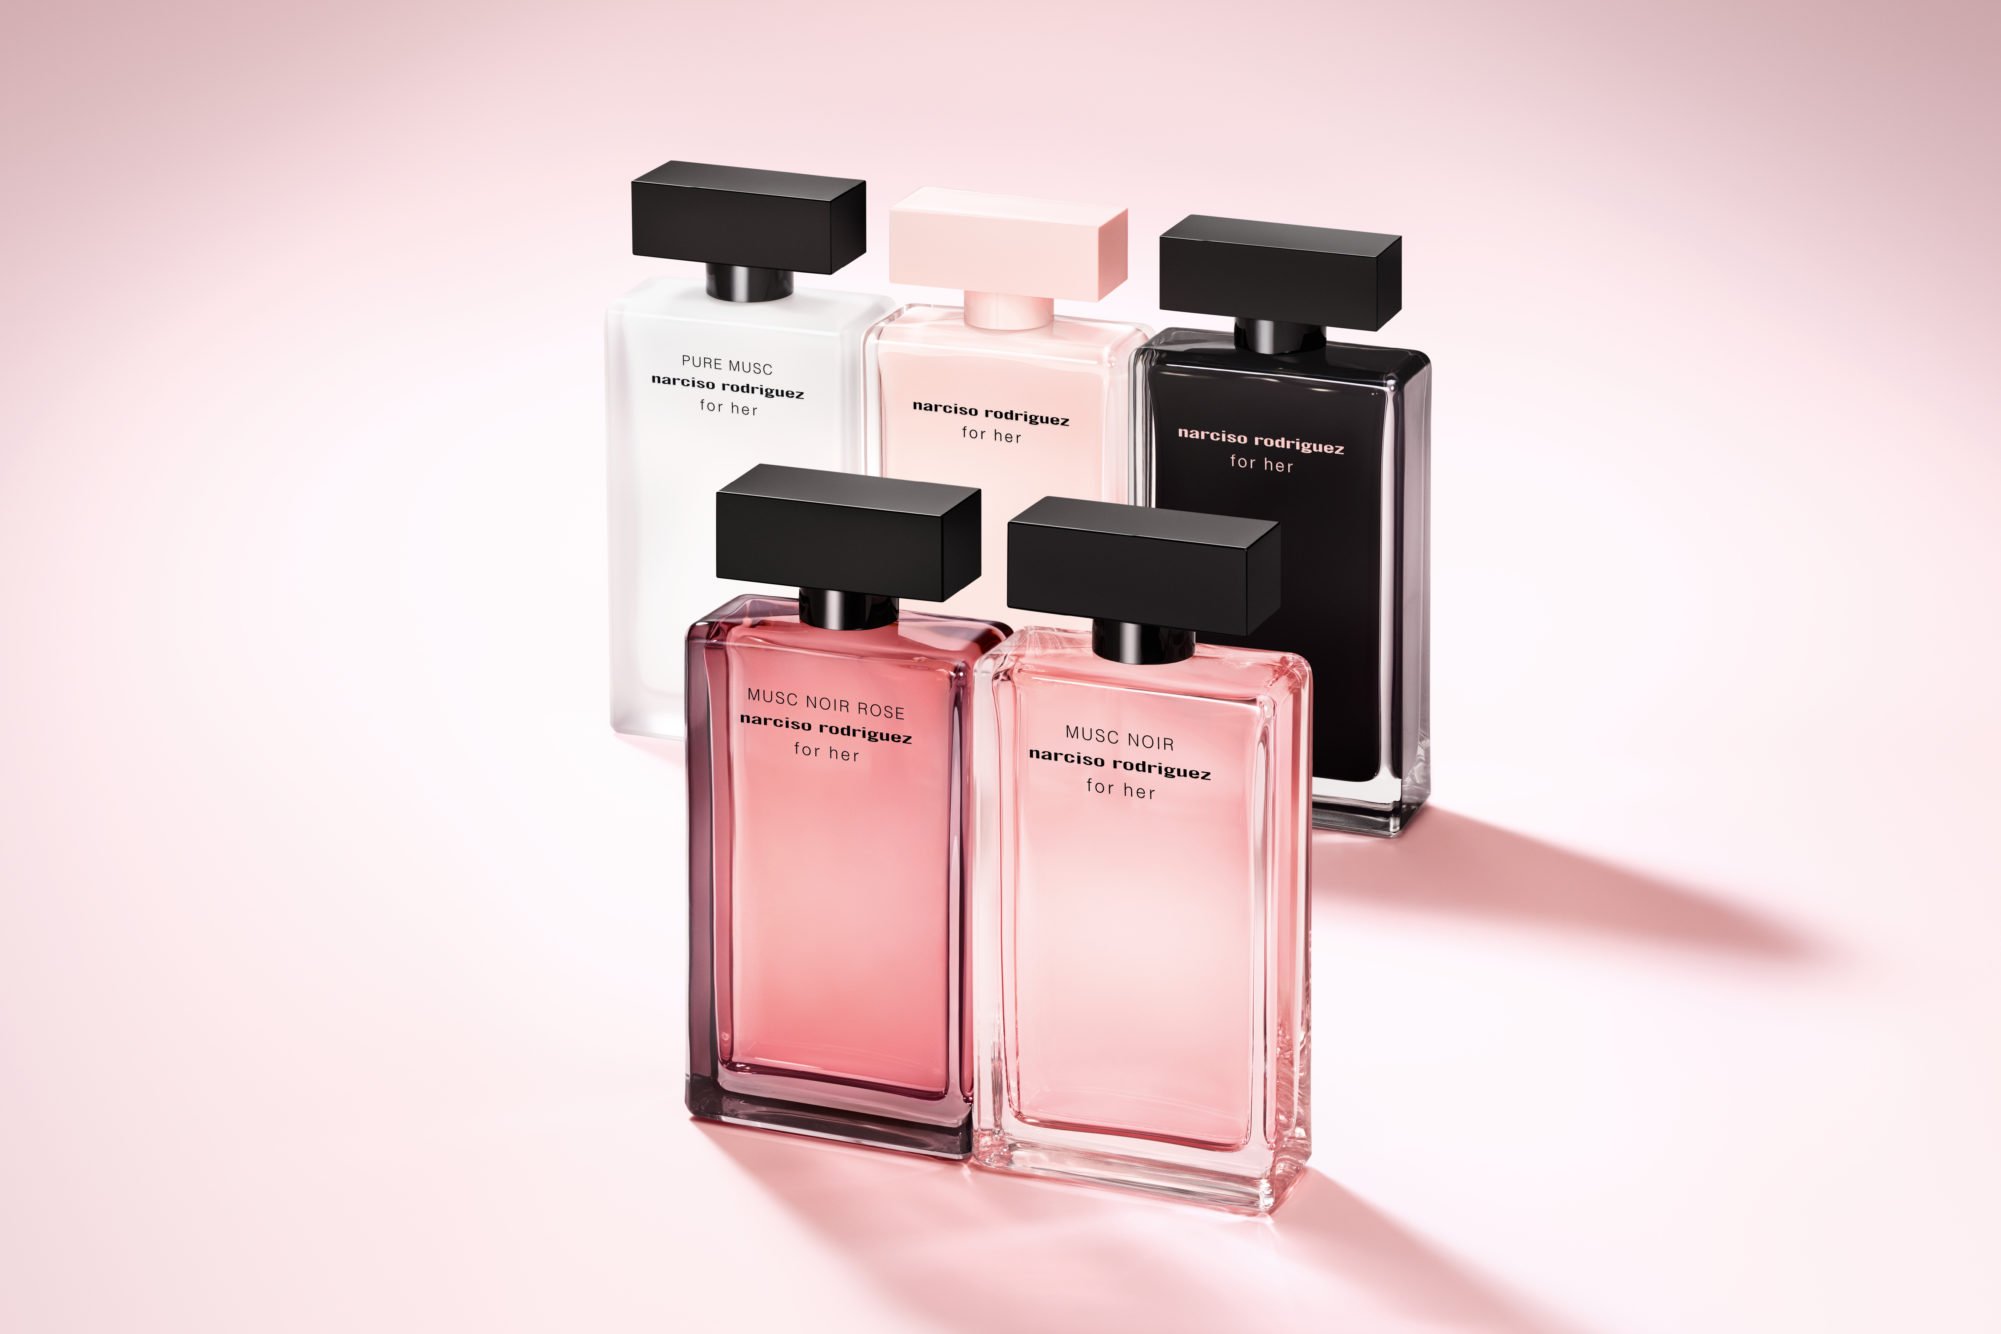 Narciso rodriguez musc noir rose. Narciso Rodriguez Noir Rose. Narciso Rodriguez Musc Noir Rose for her. Narciso Rodriguez Musc Noir w 100 ml EDP.